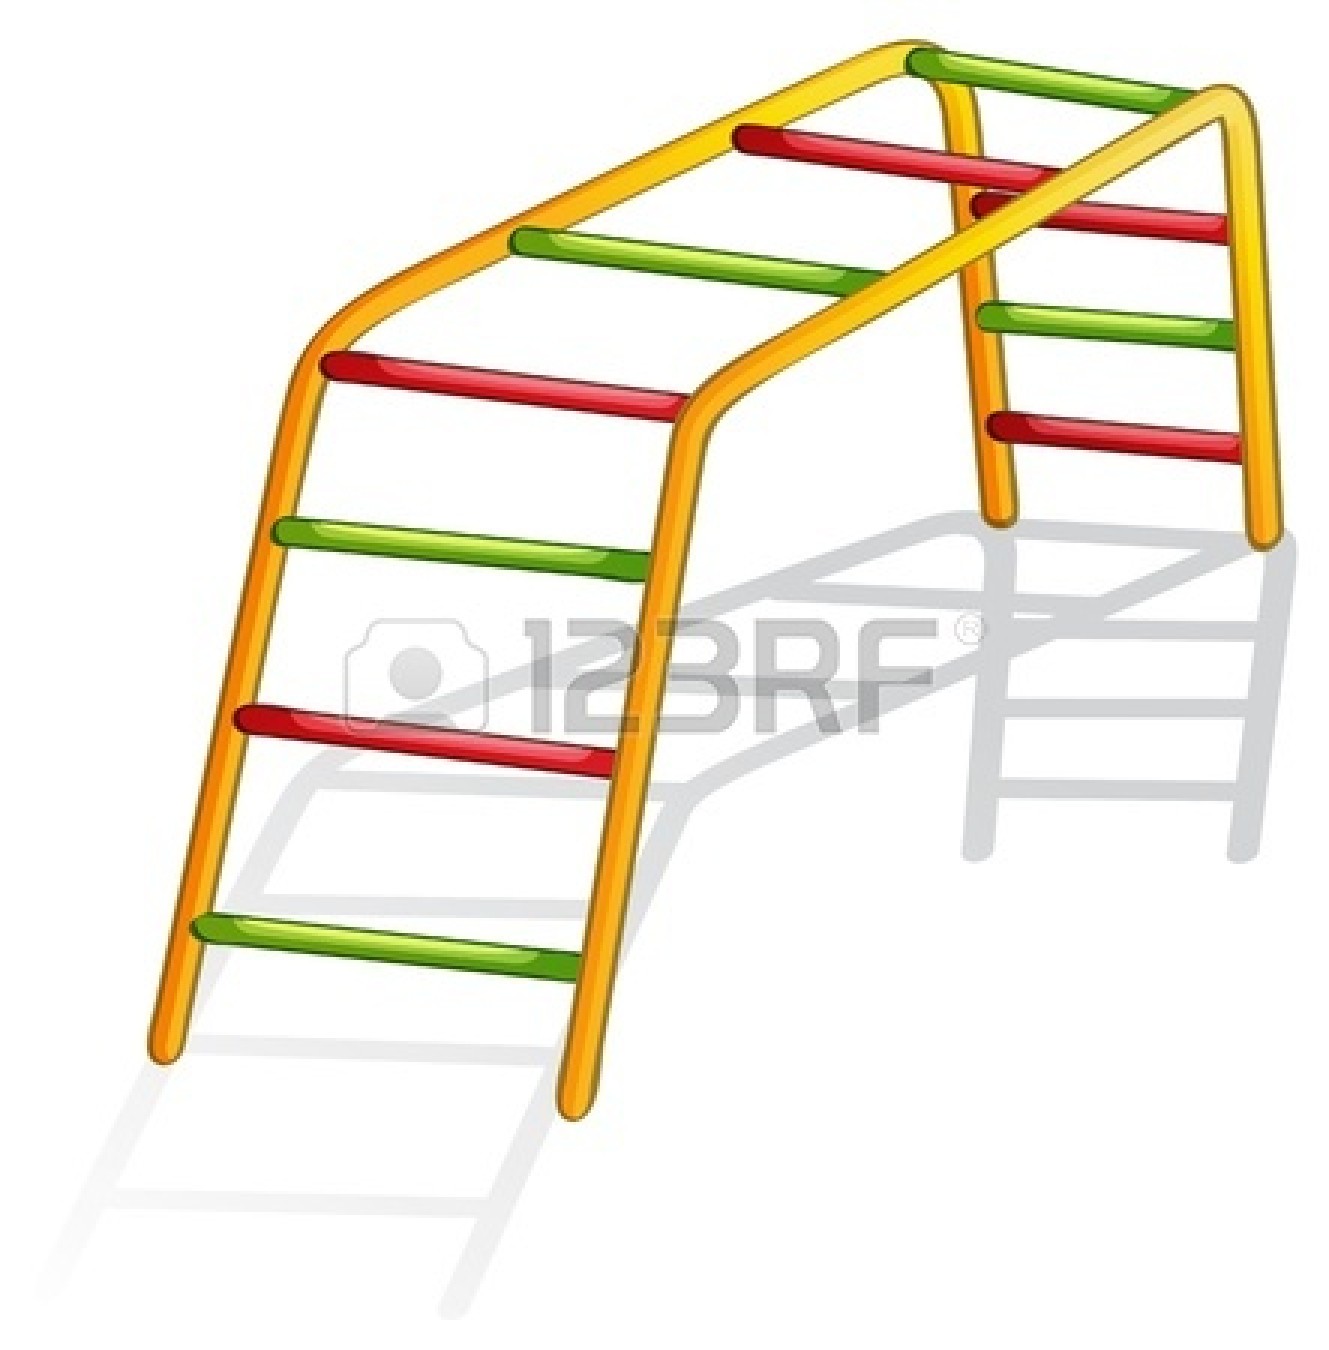 Playground Equipment Clip Art   Clipart Panda   Free Clipart Images